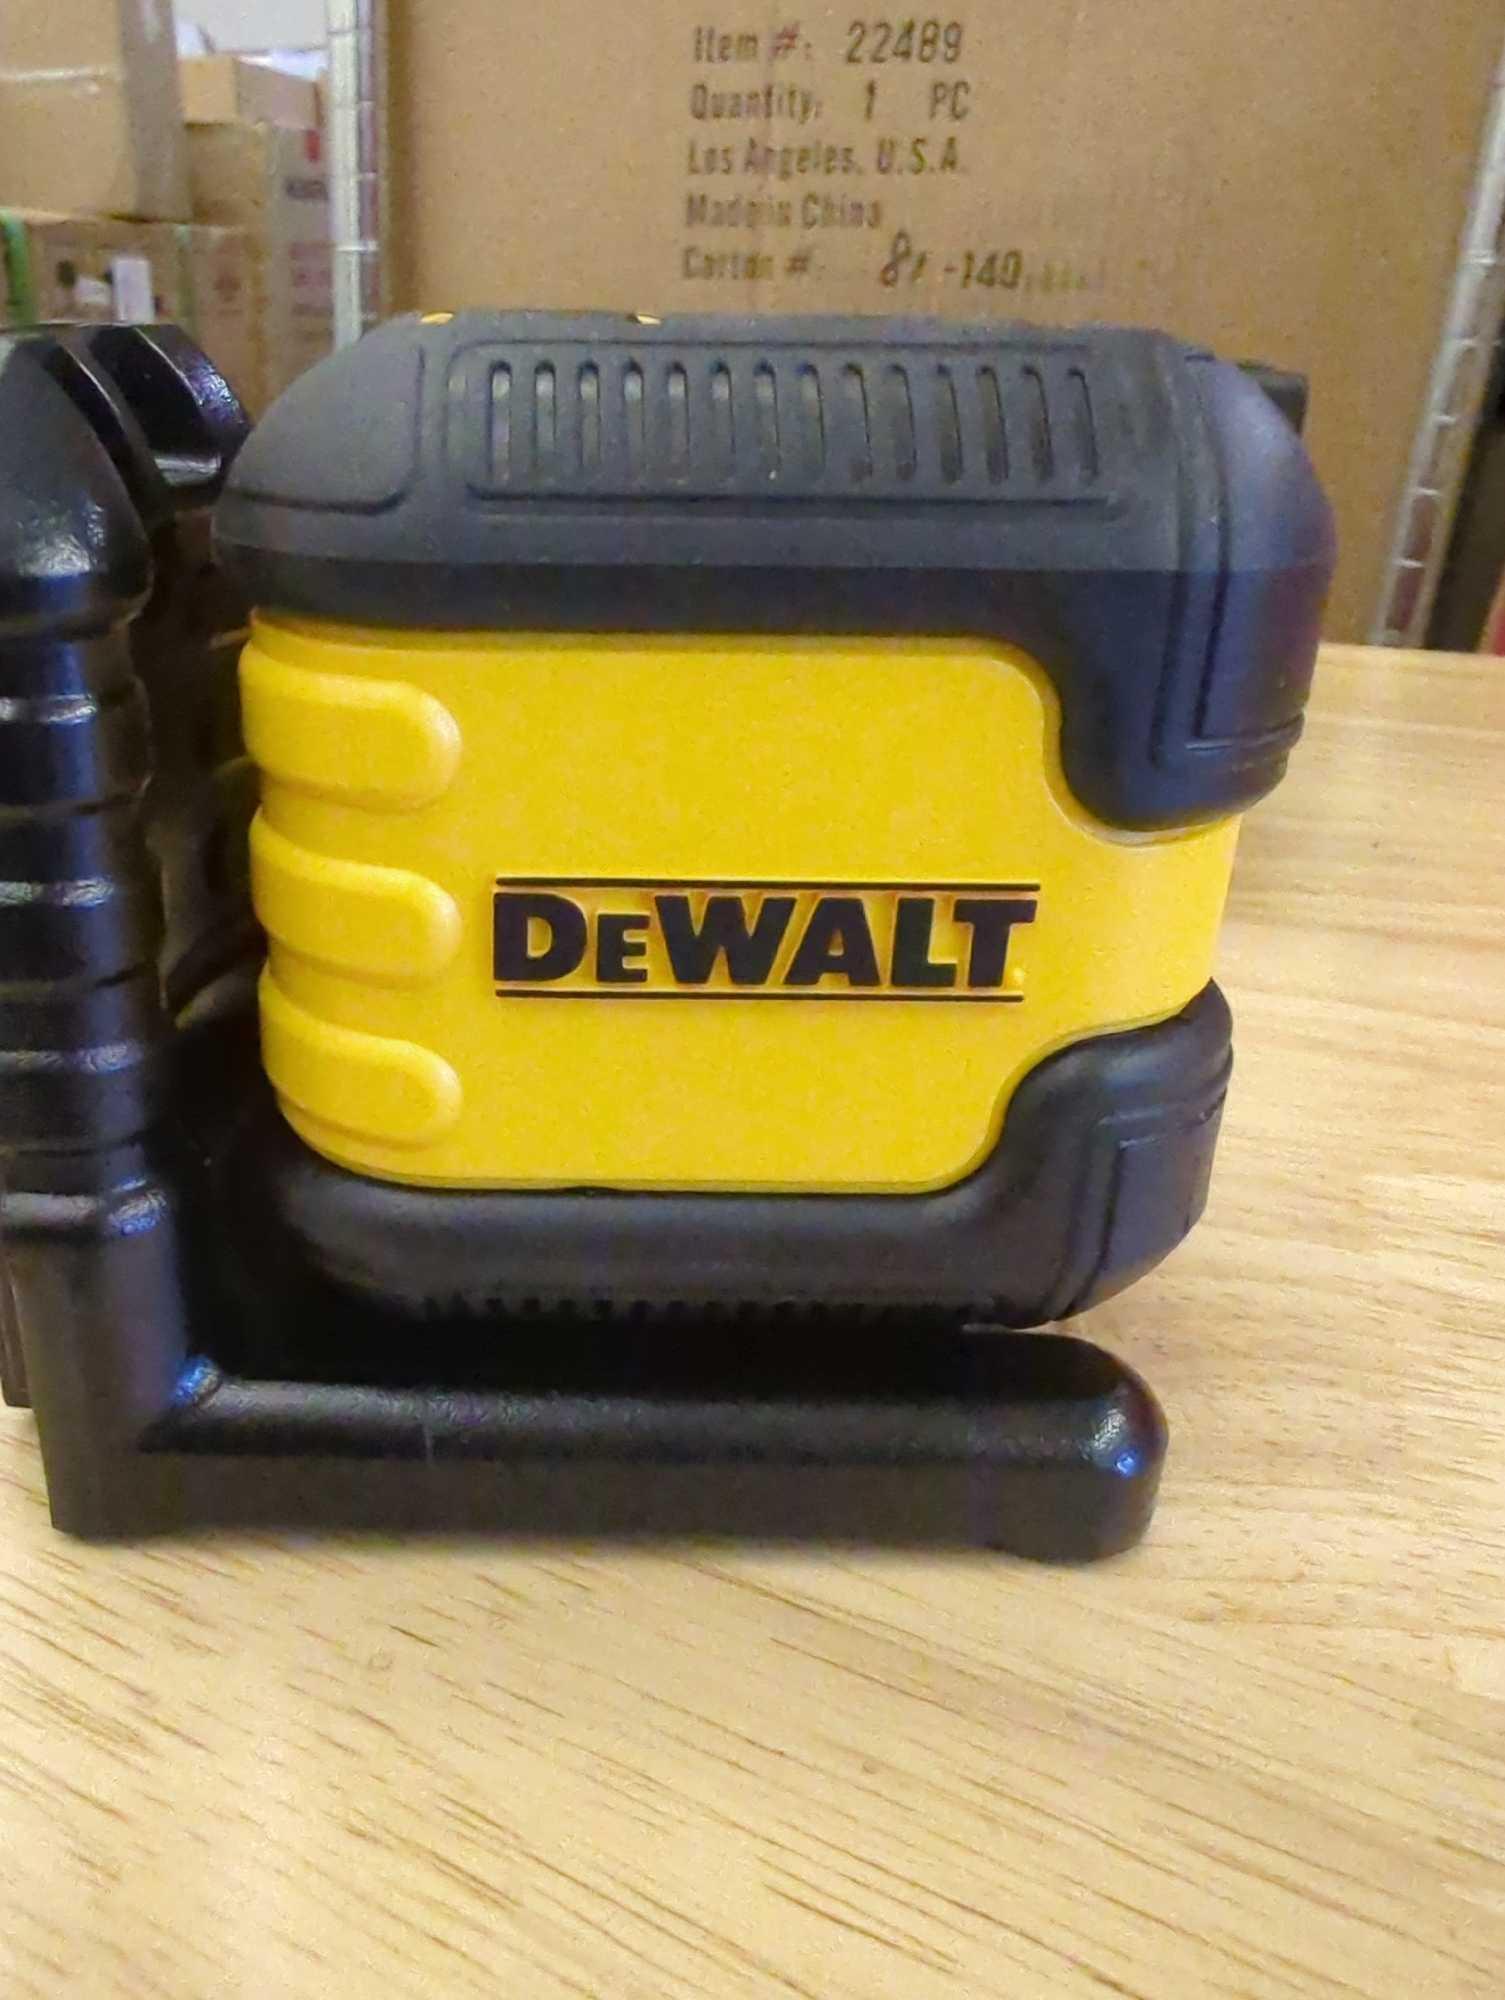 DEWALT 55 ft. Green Self-Leveling Cross Line Laser Level with (2) AA Batteries & Case, Appears to be